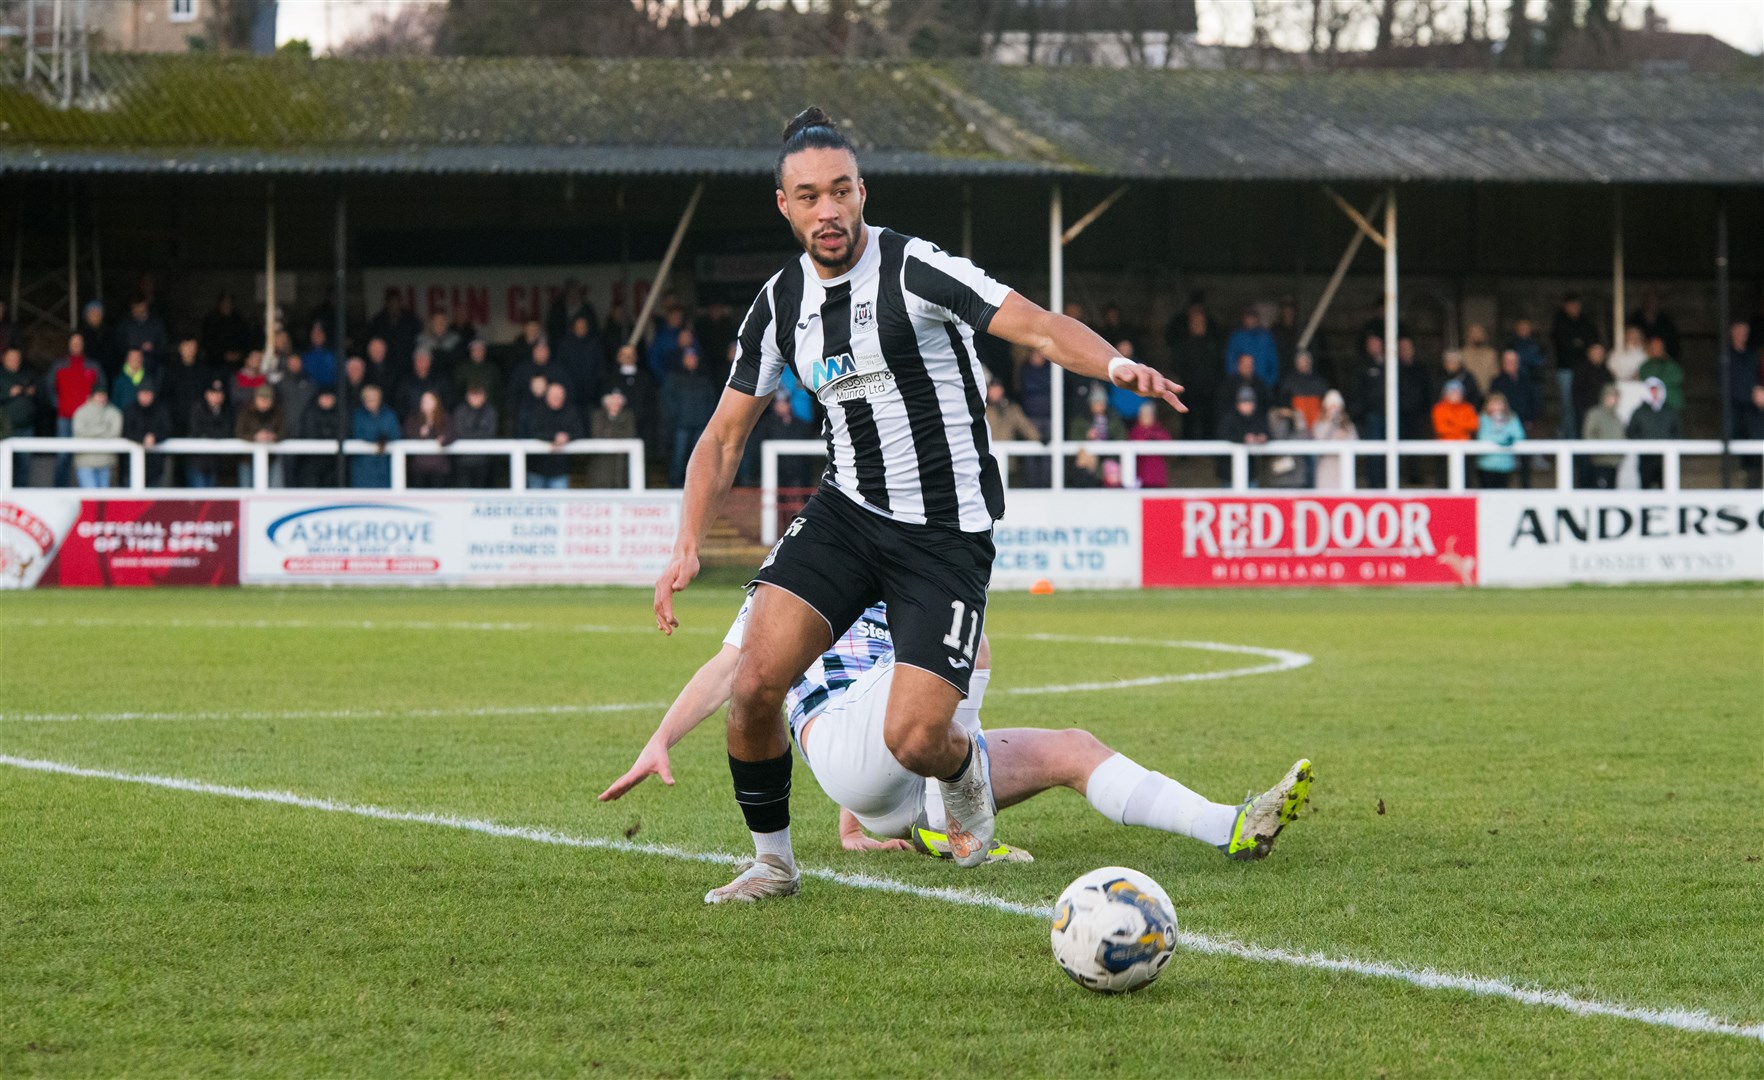 Dayshonne Golding impressed on his Elgin City debut. PIcture: Beth Taylor